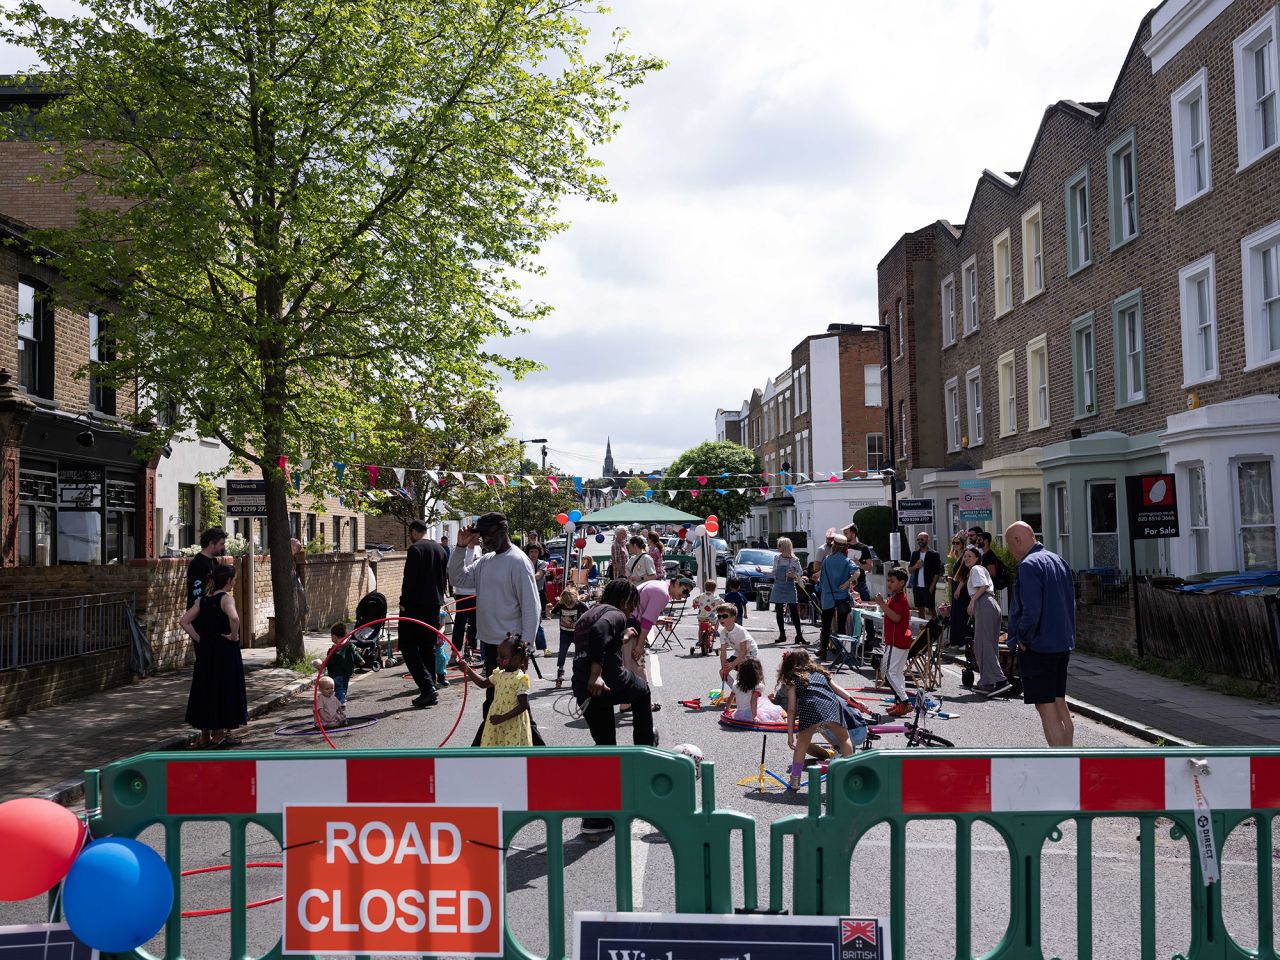 Roads were closed across the UK for Sunday's street parties.